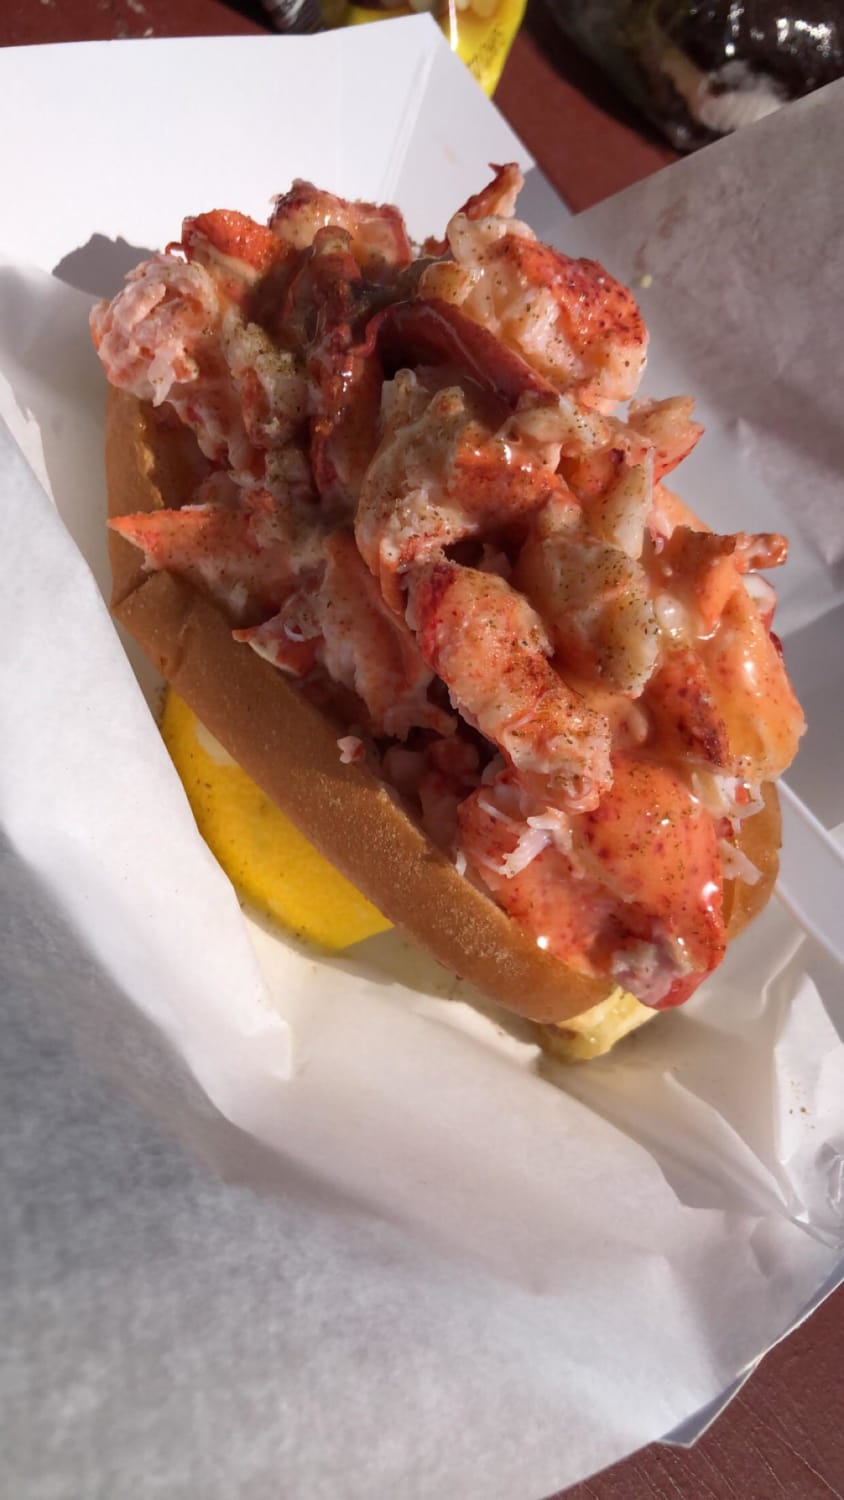 Lobster roll I had in Portland, Maine from a food truck. Best thing I’ve ever had.